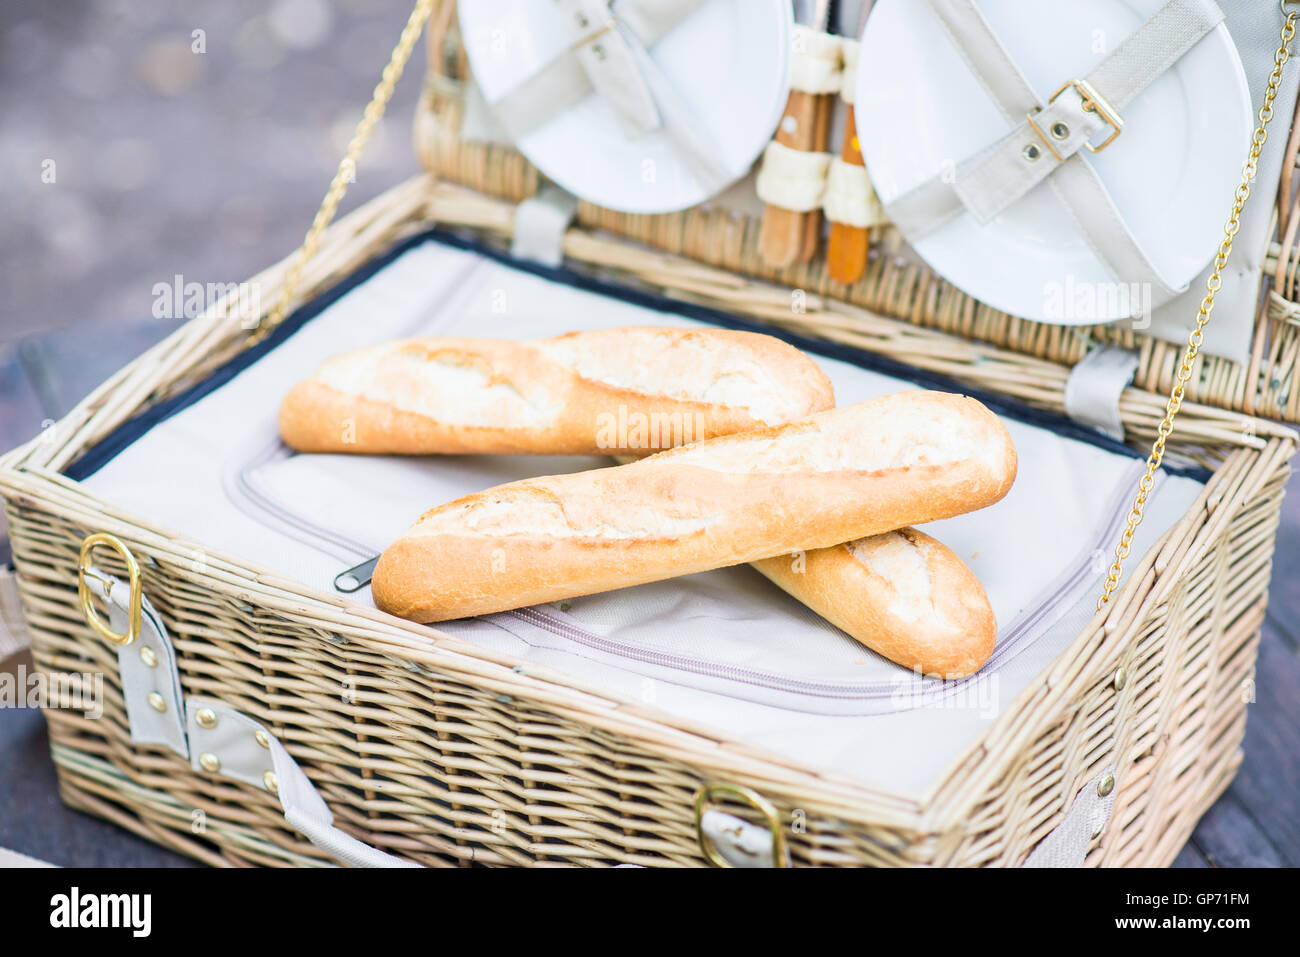 Open picnic basket with bread inside over a wooden table in the park. Stock Photo